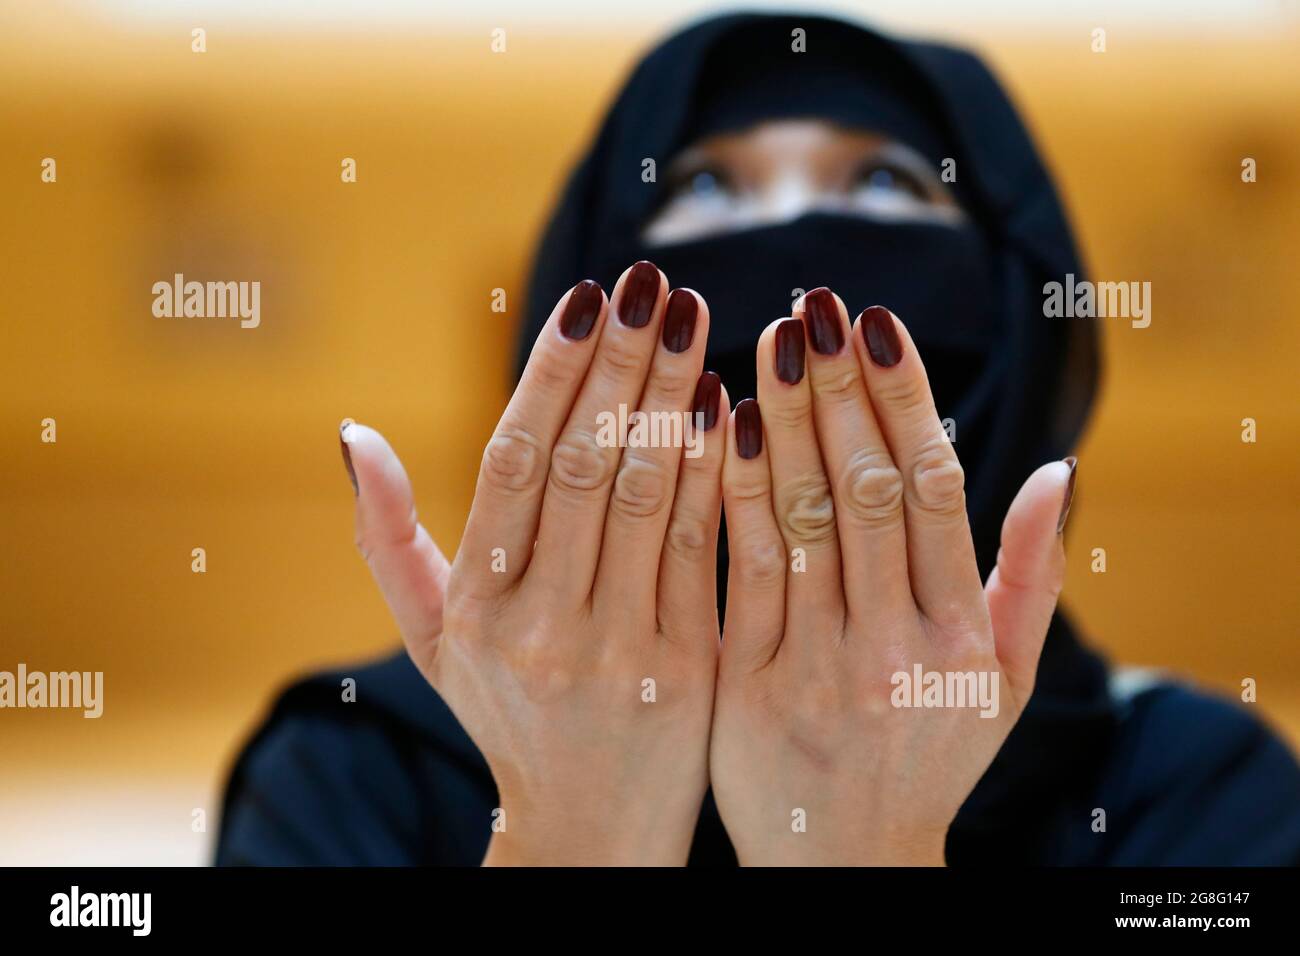 Muslim woman in abaya prays with her hands raised, United Arab Emirates, Middle East Stock Photo